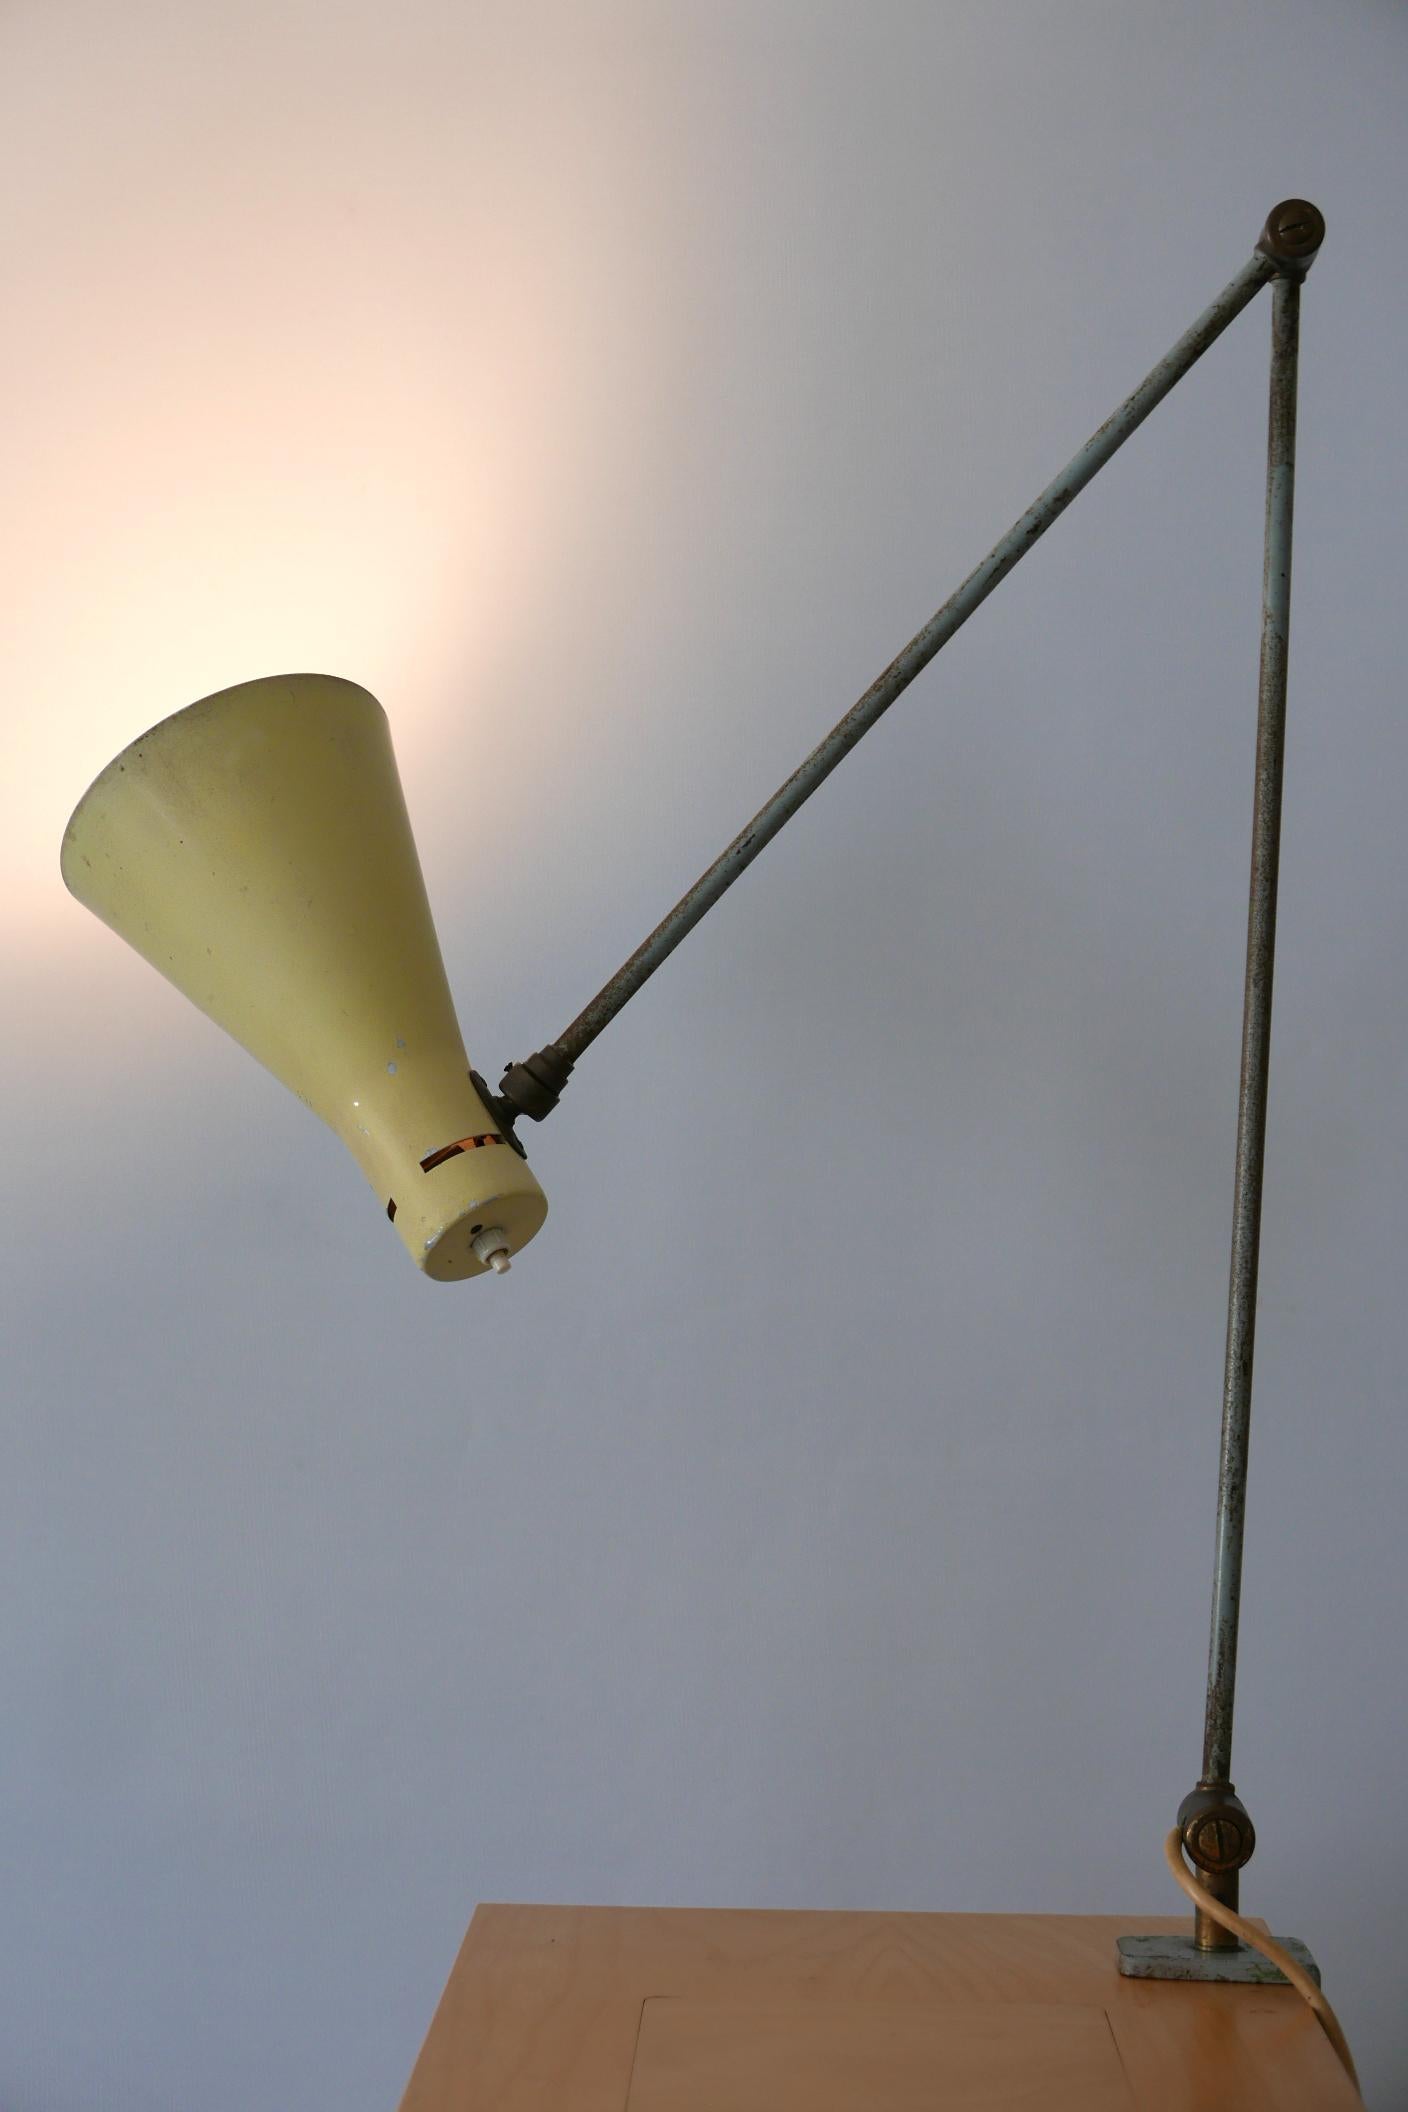 Extremely rare, articulated Mid-Century Modern task lamp or clamp table light. Designed by Vittoriano Viganò for Arteluce, 1950s, Italy.

Executed in aluminium, brass and metal, the lamp needs 1 x E27/E26 Edison screw fit bulb, is wired and in